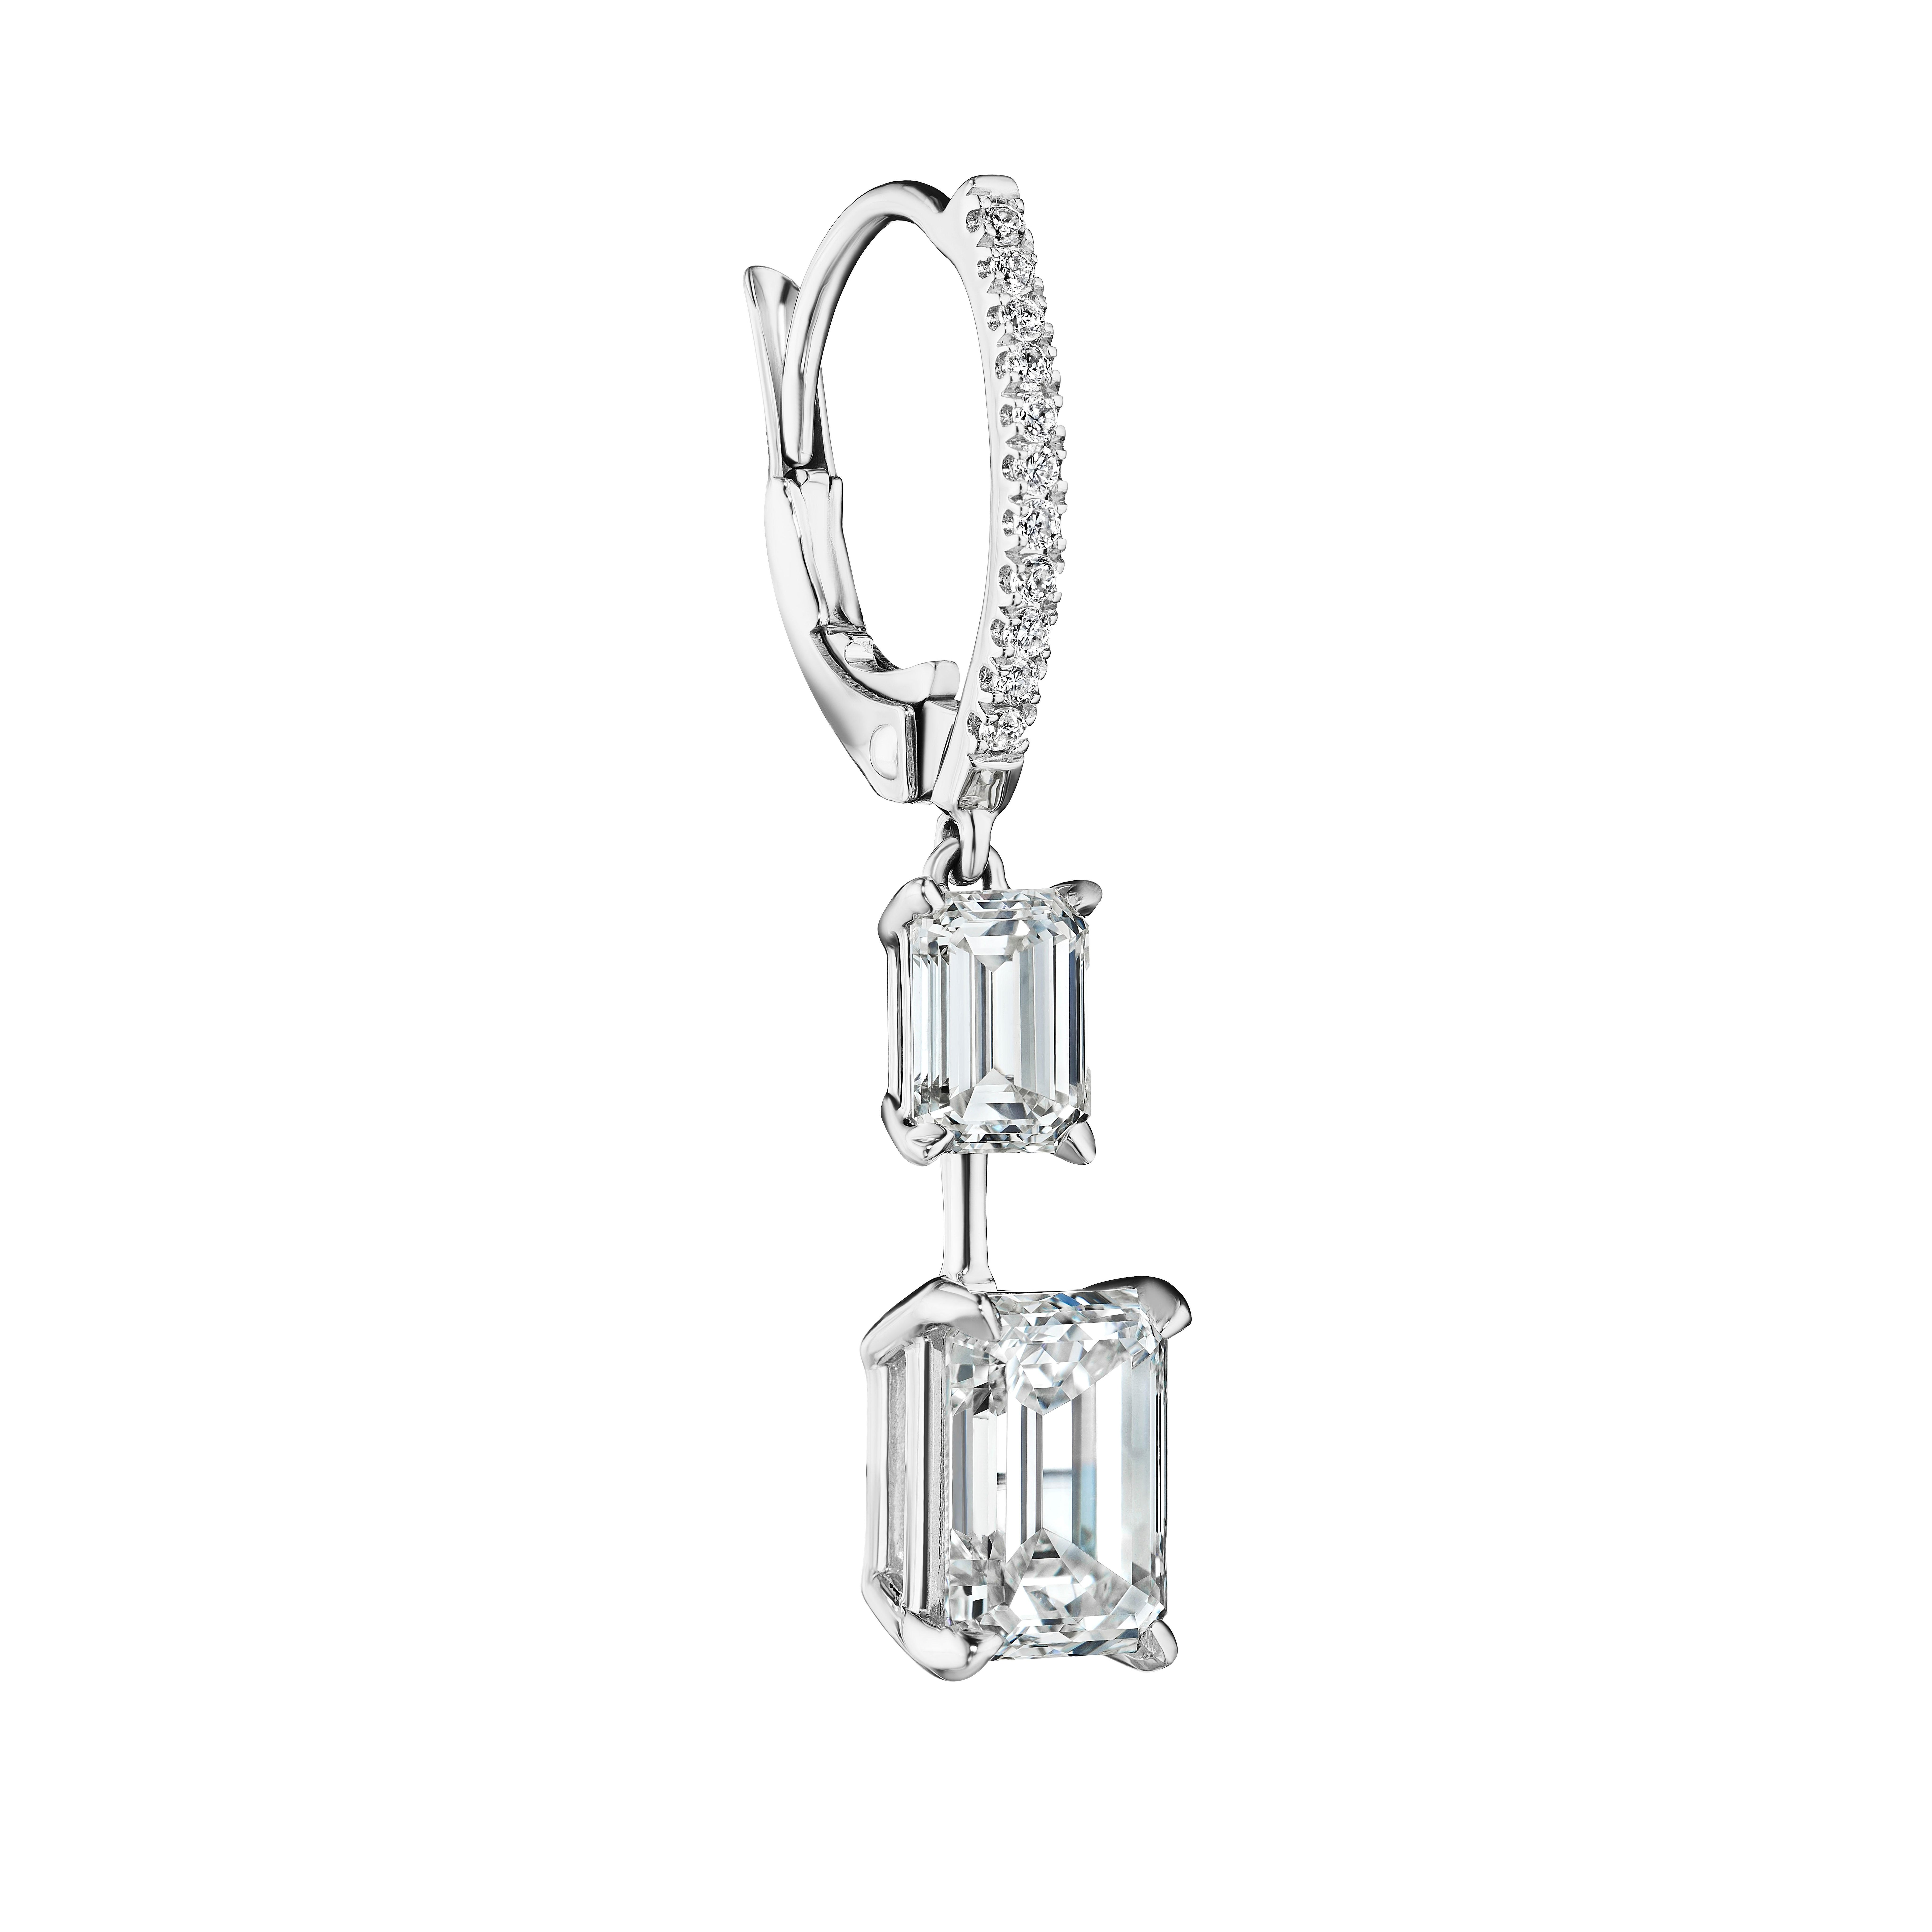 4.25ct GIA Certified Emerald Cut Diamond Earrings in 18KT Gold In New Condition For Sale In New York, NY